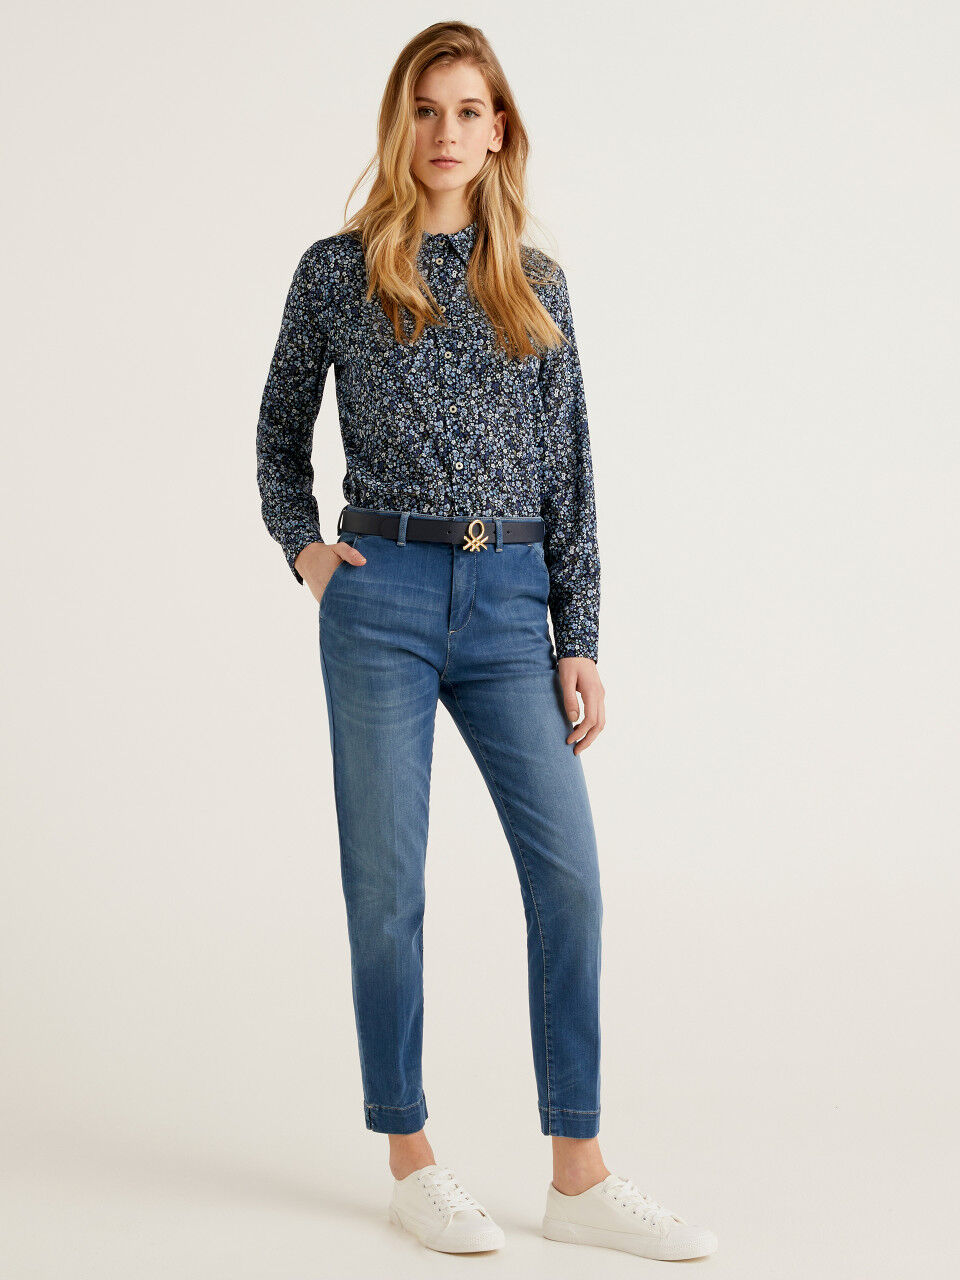 UNITED COLORS OF BENETTON Pantalone Jeans Fille